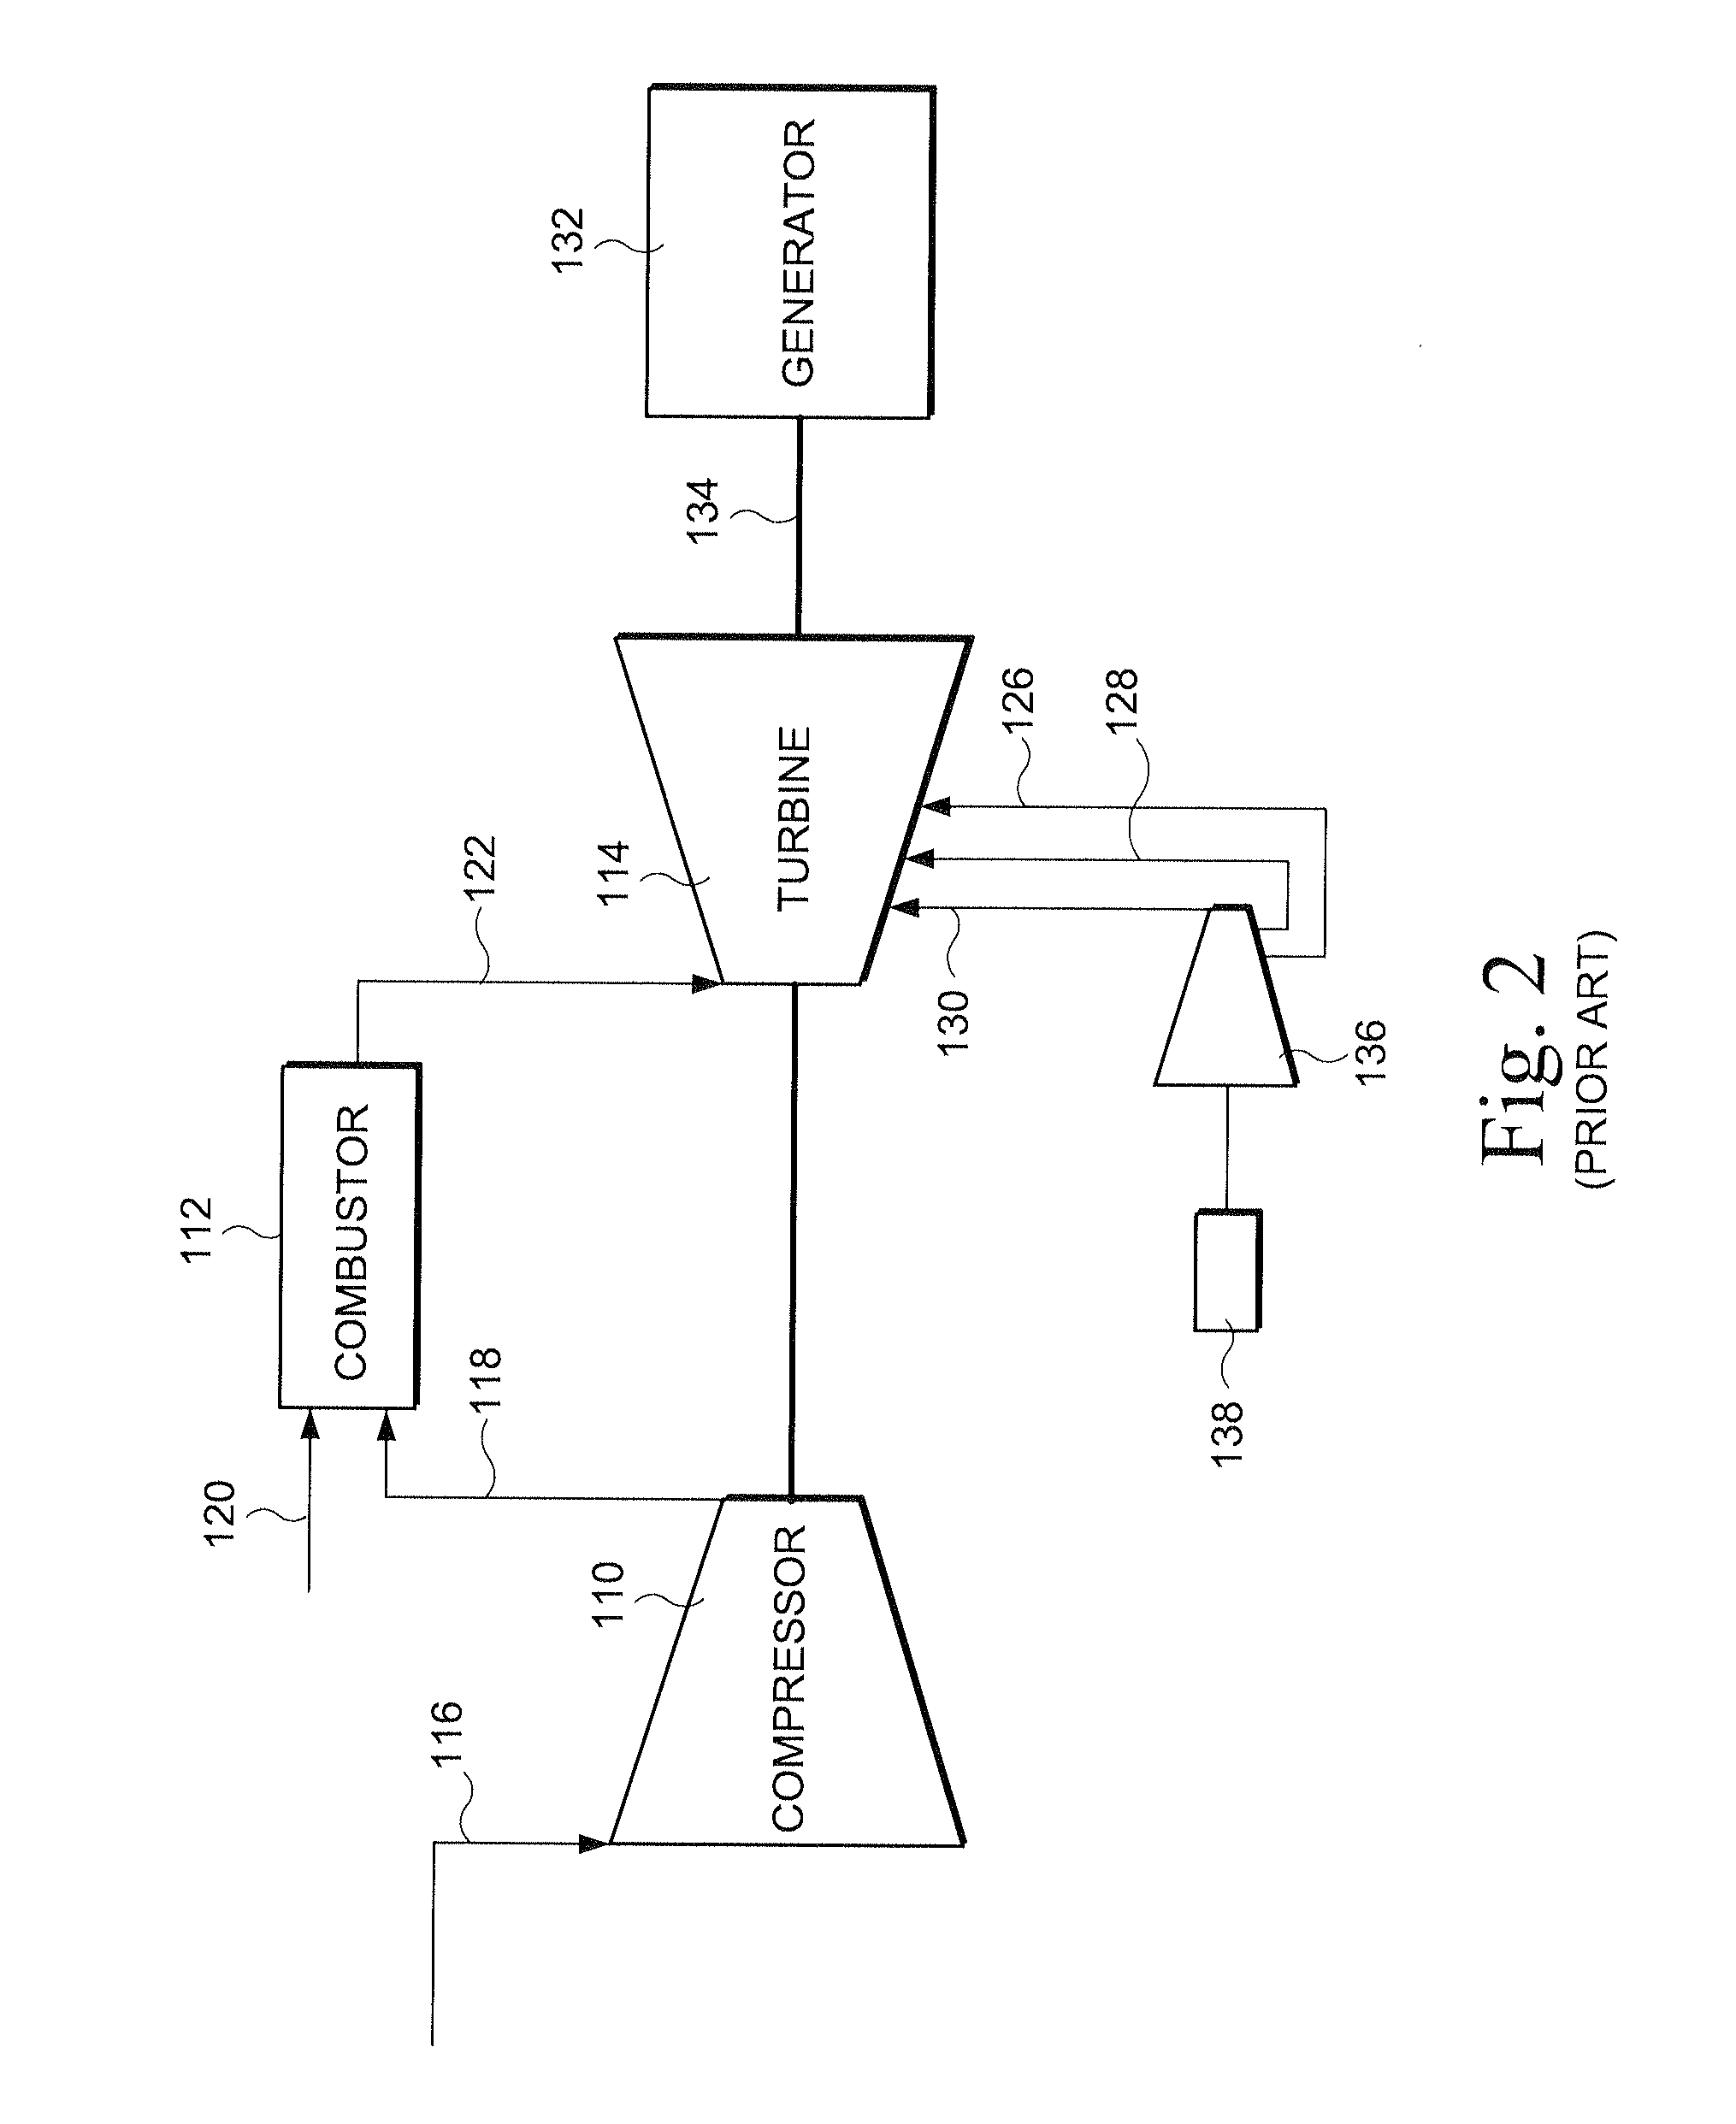 Apparatus and related methods for turbine cooling